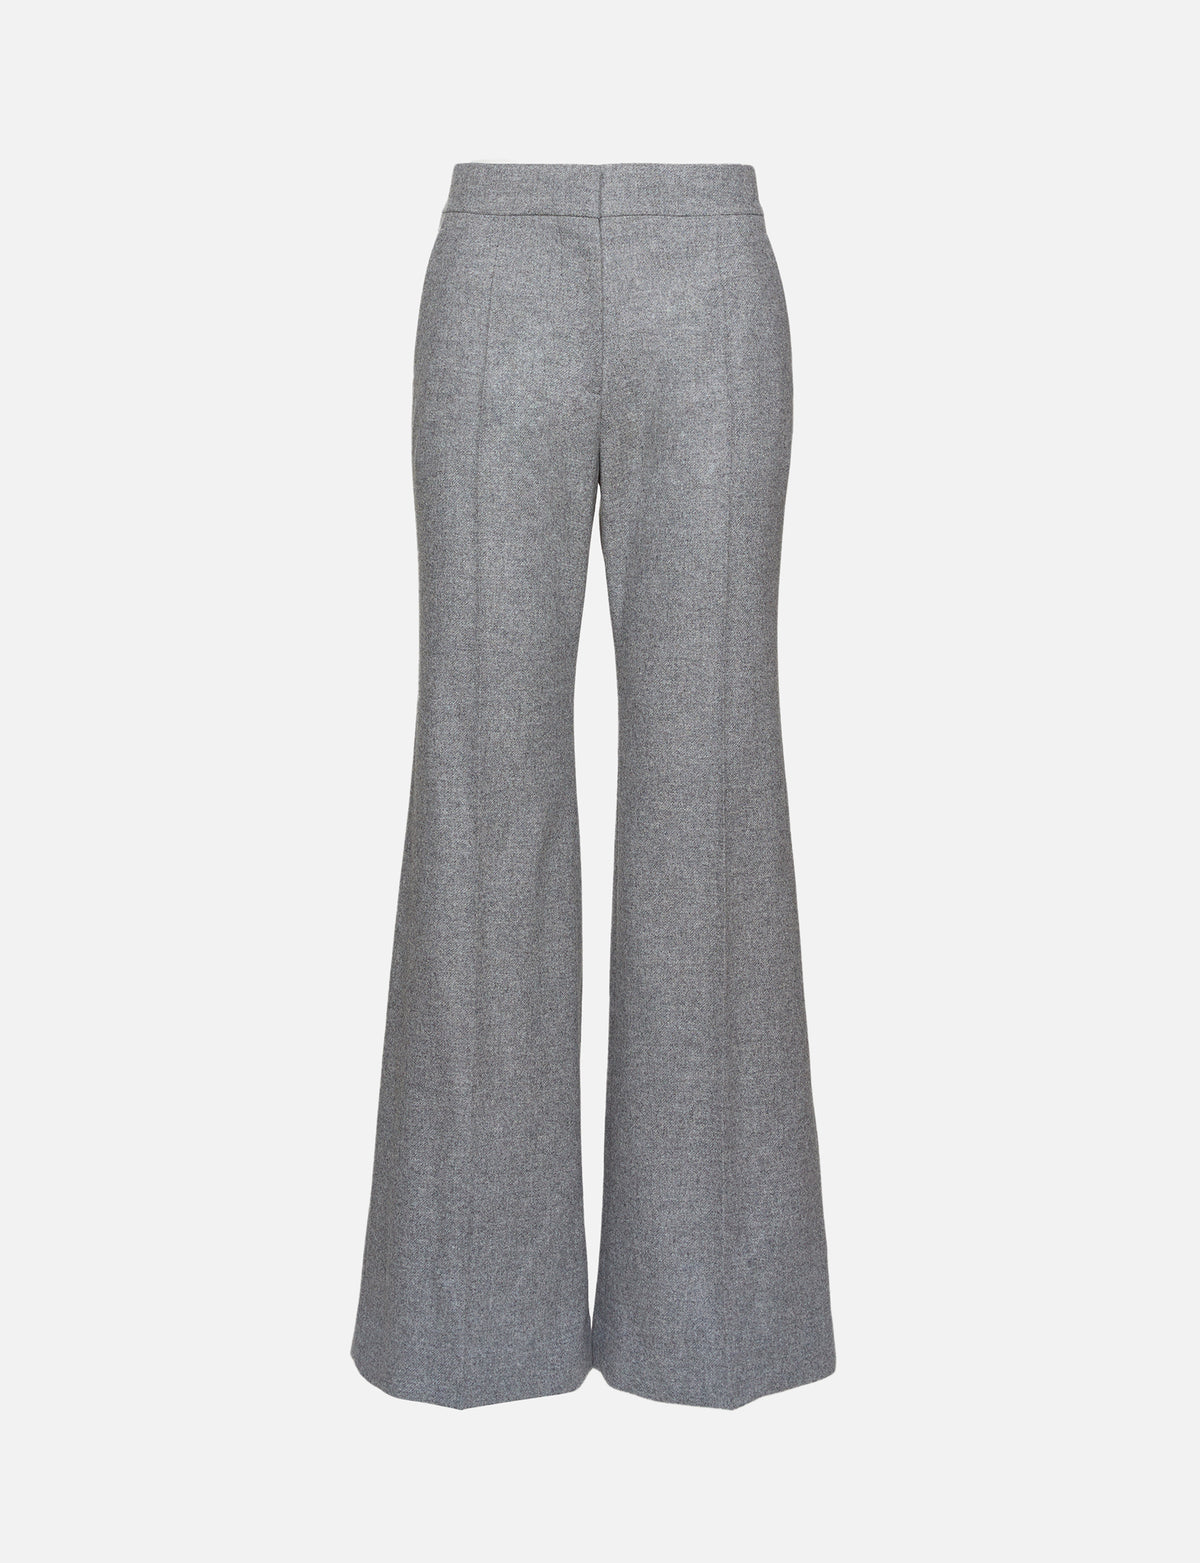 view 1 - Flare Pant